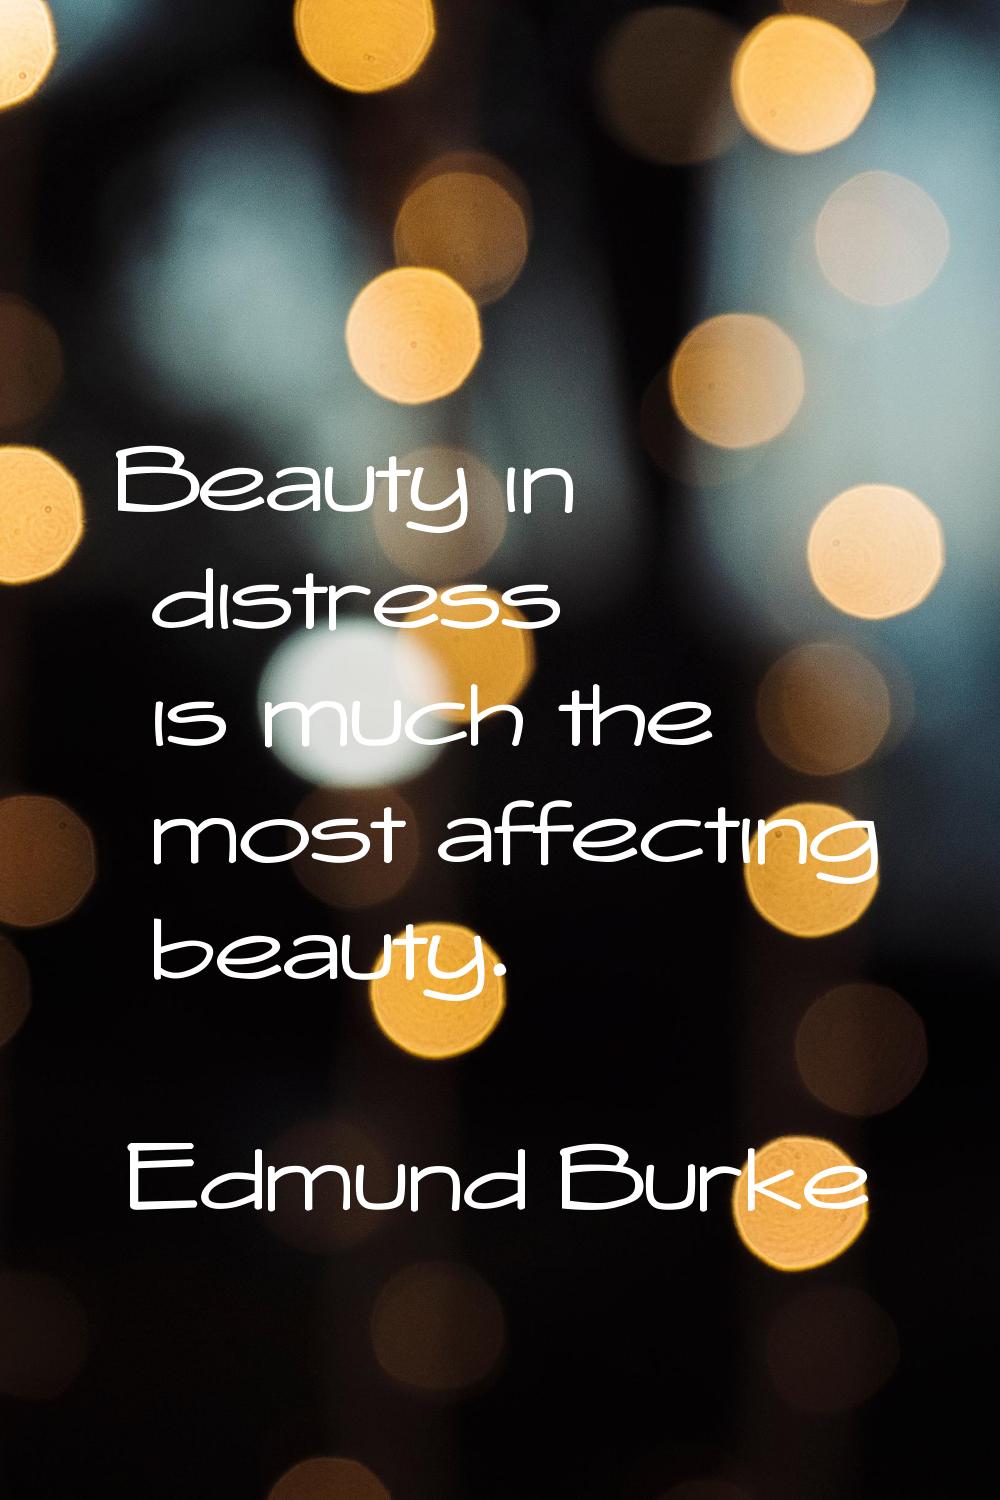 Beauty in distress is much the most affecting beauty.